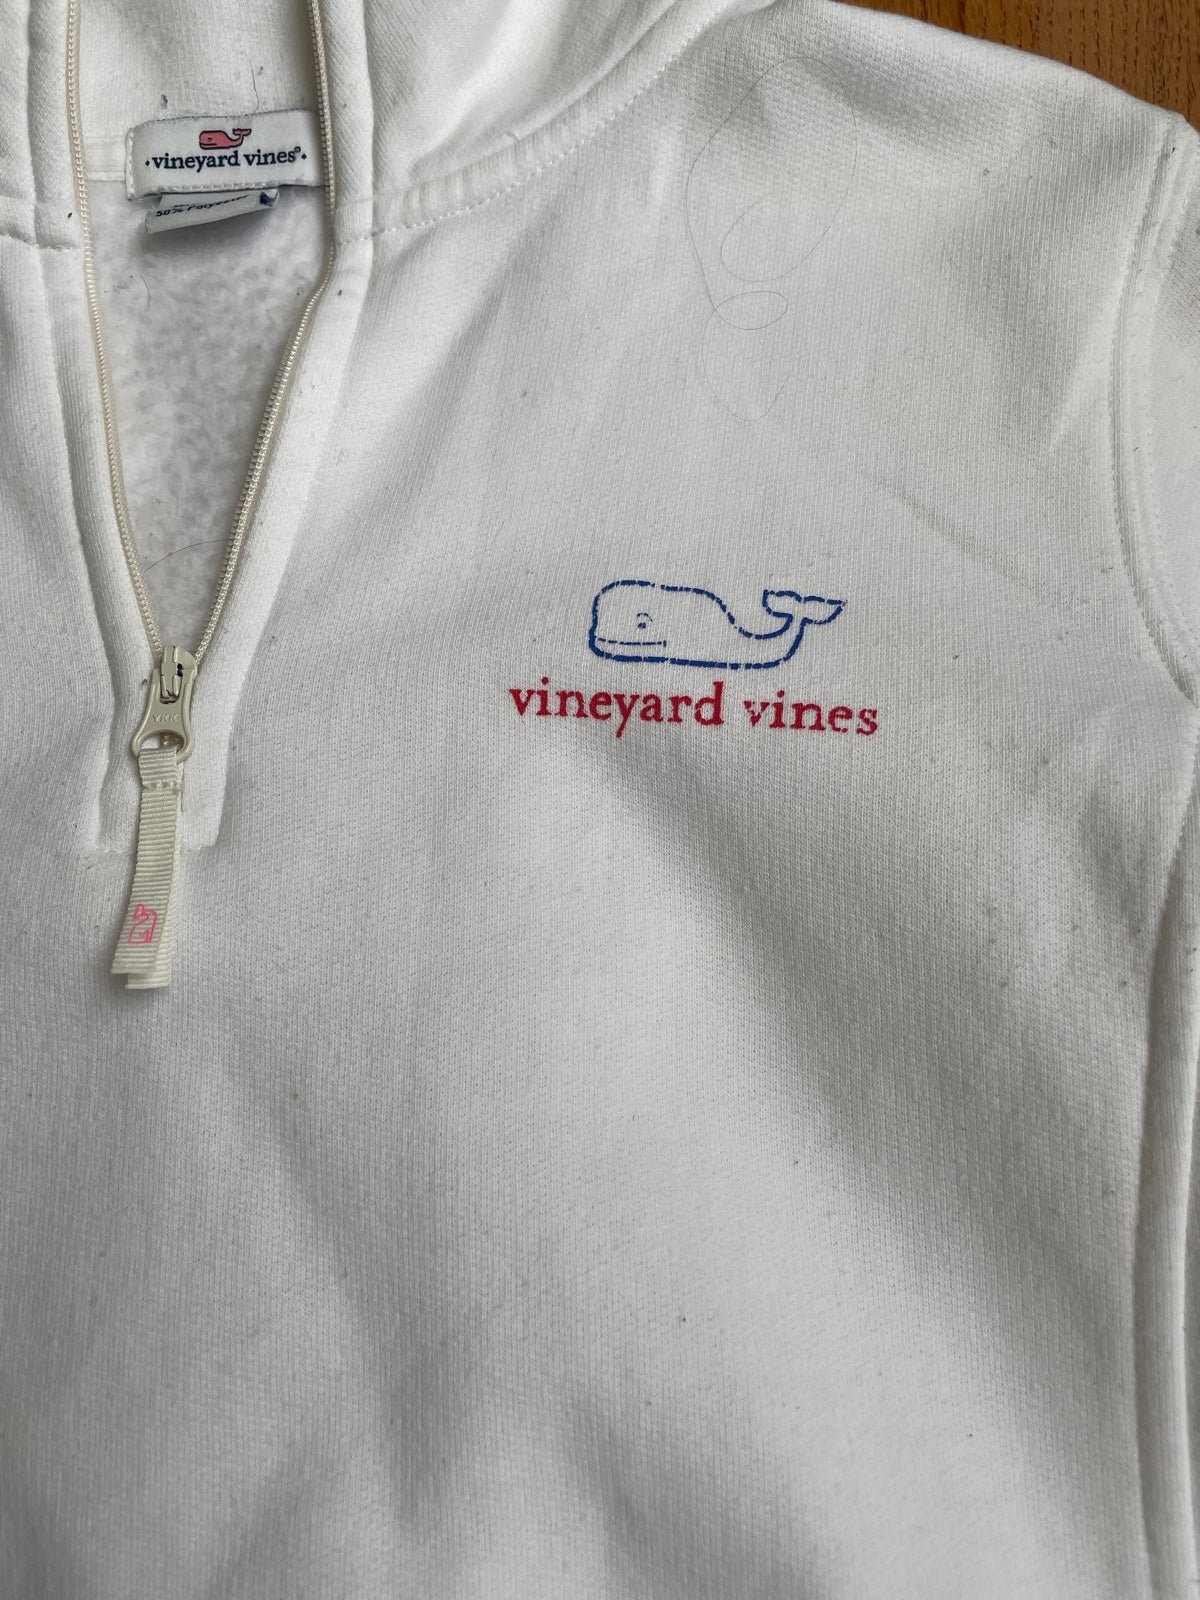 cheapest place to buy  Vineyard Vines 3/4 zip pullover jTnQICYJb online store